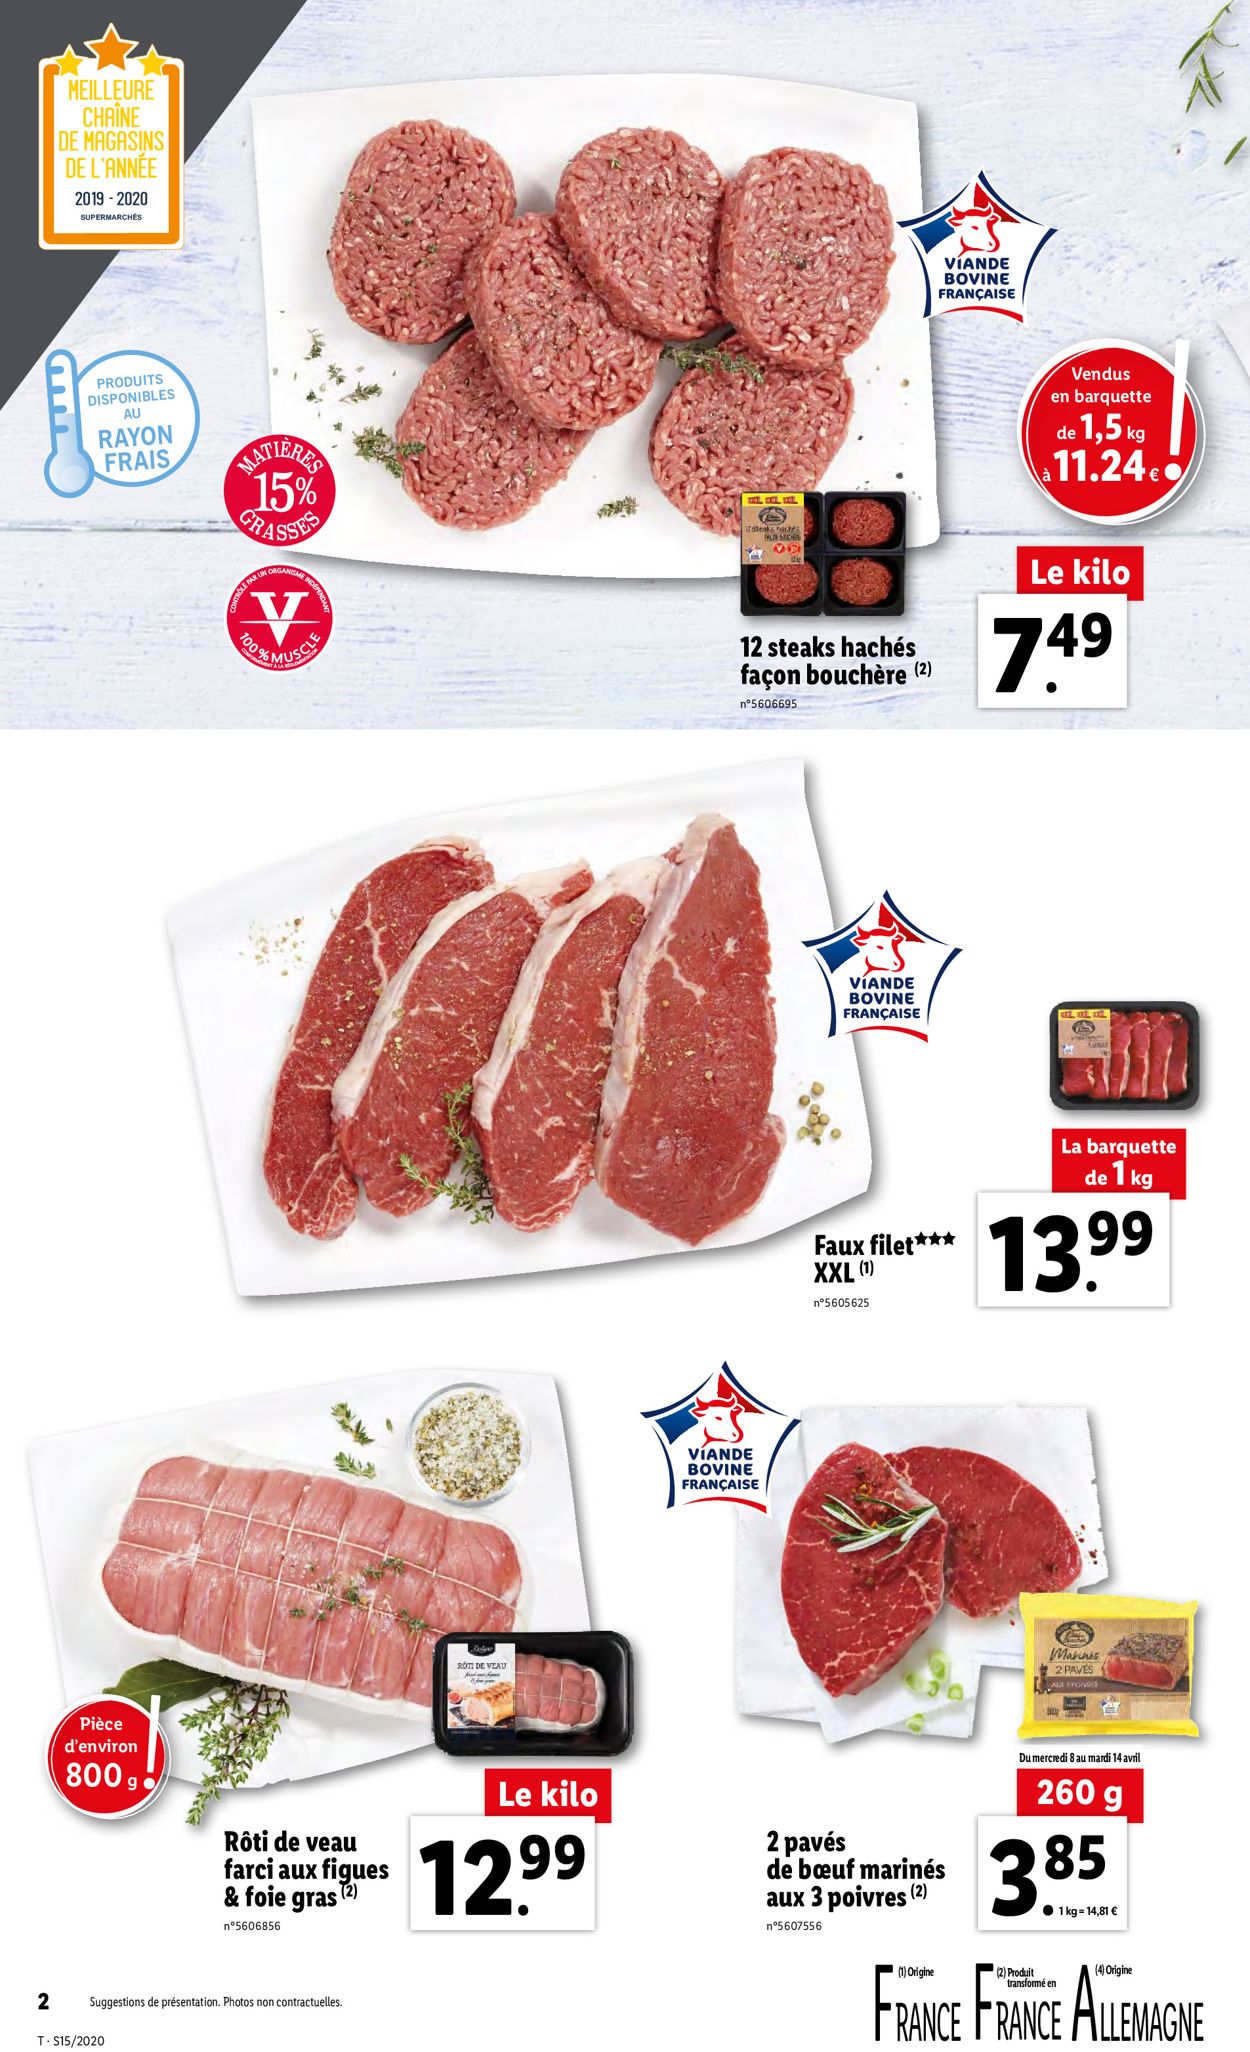 Lidl Catalogue - 08.04-14.04.2020 (Page 2)